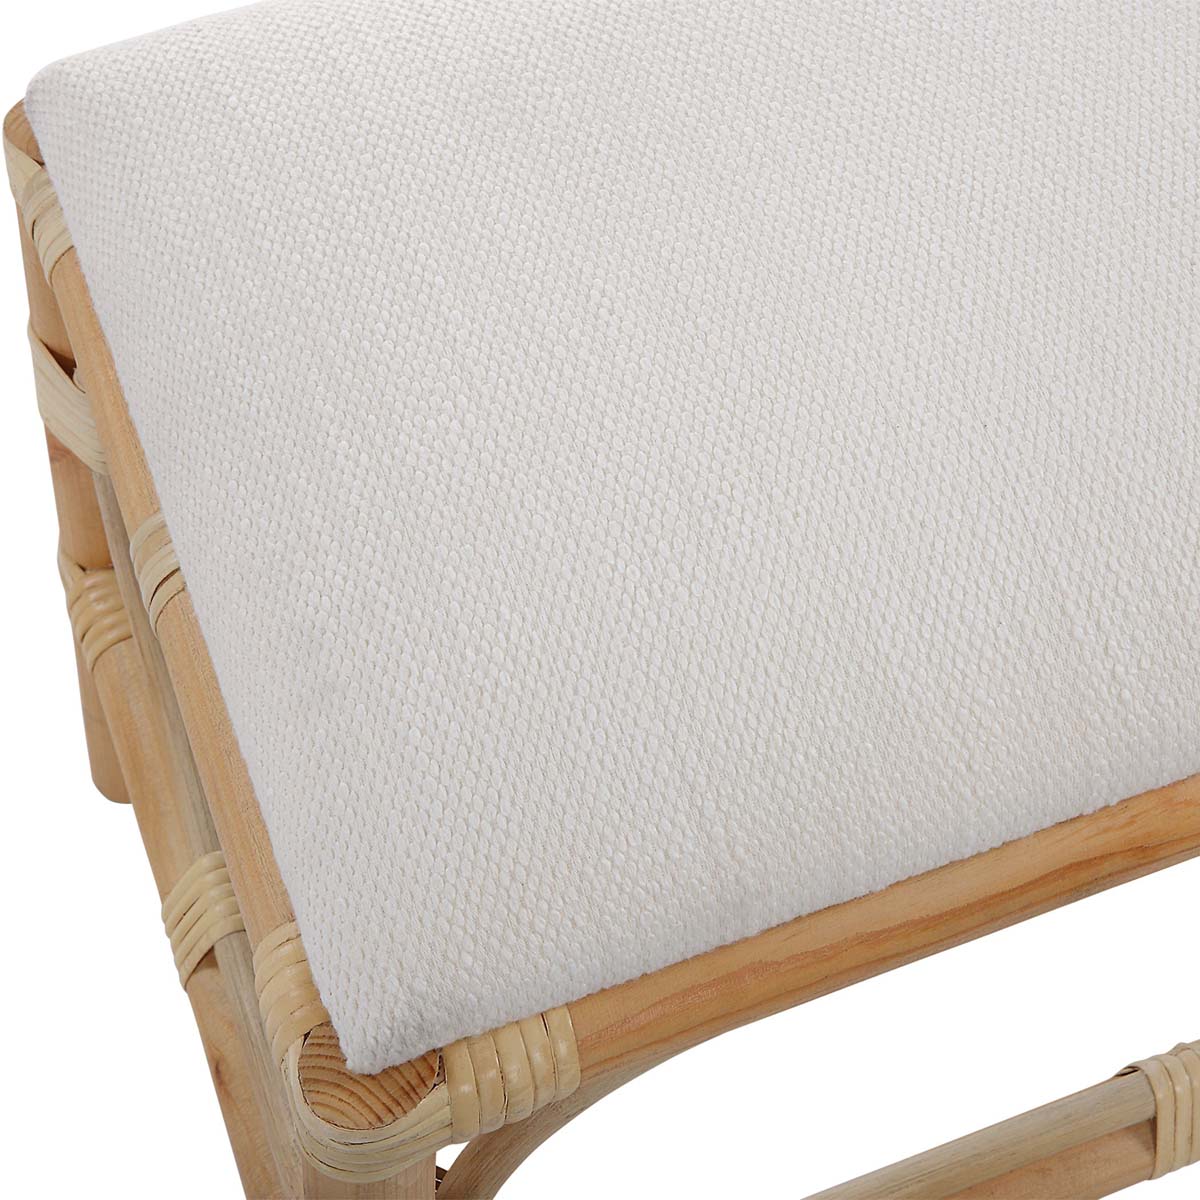 Laguna Small Bench  Small bench, Seat cushion covers, Bench